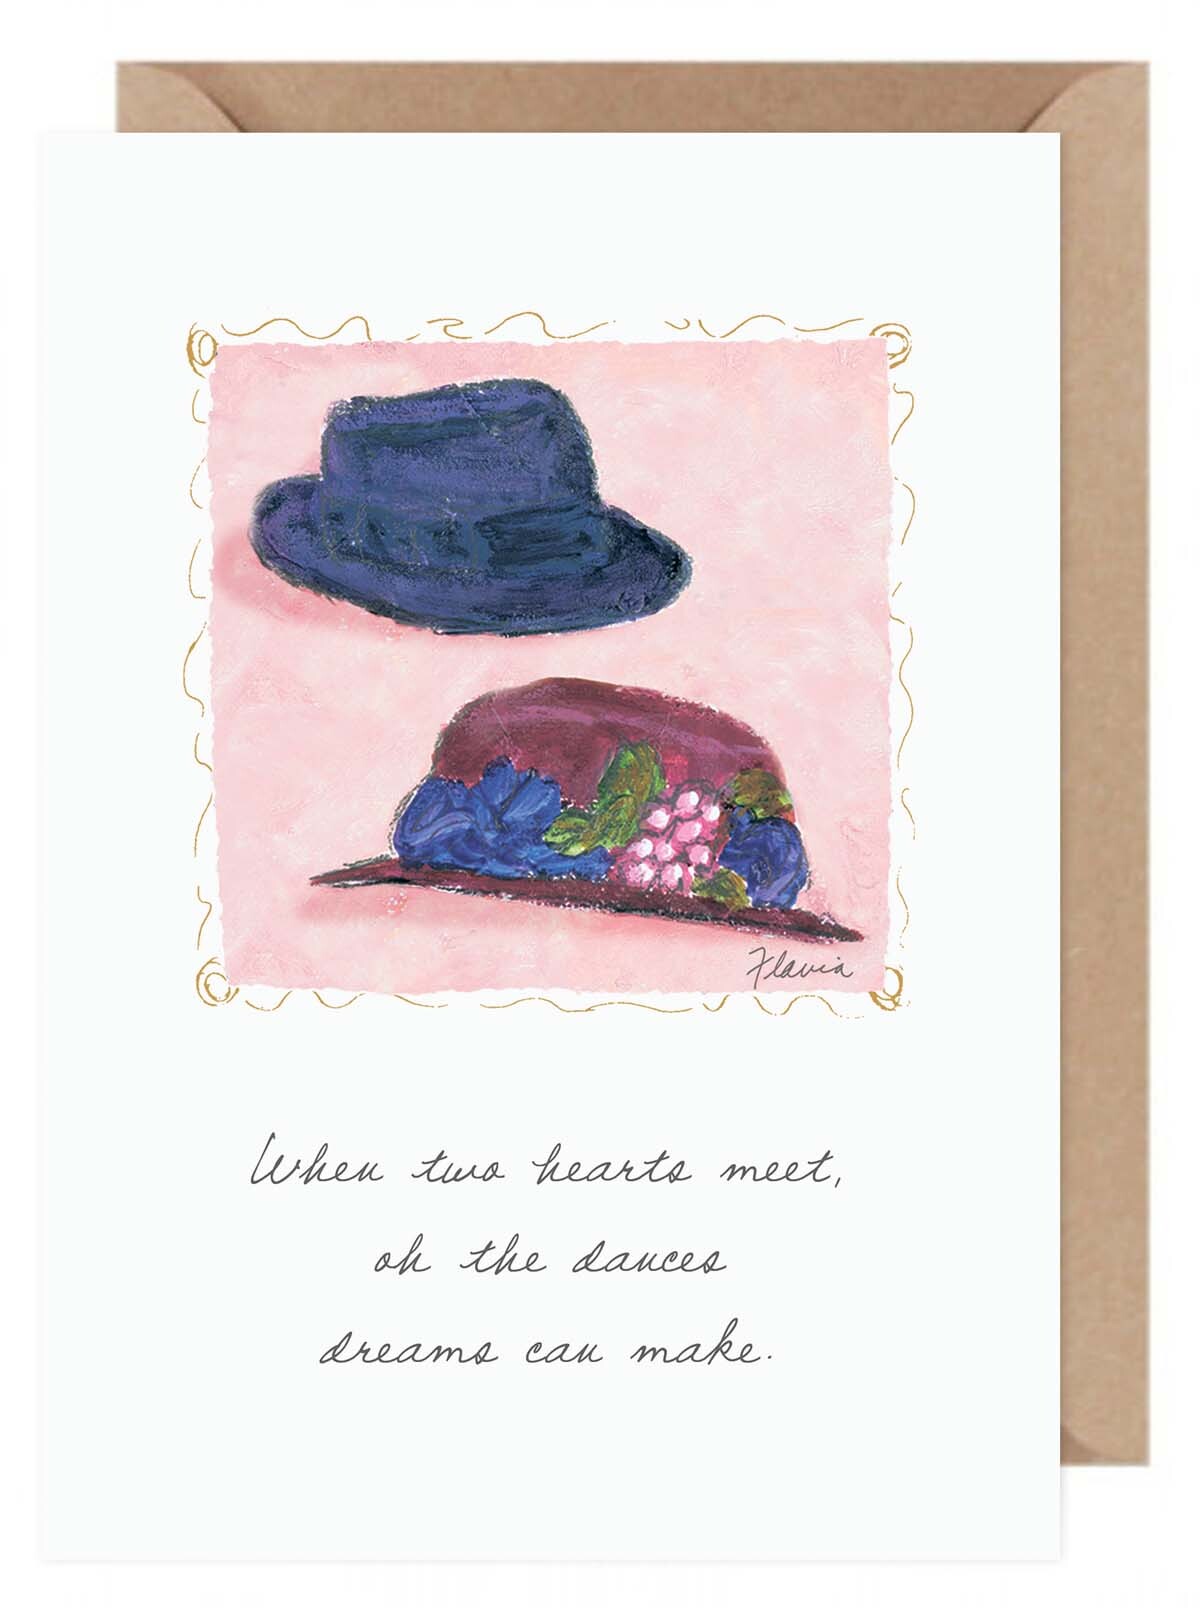 When Hearts Meet - a Flavia Weedn inspirational greeting card  0003-2168